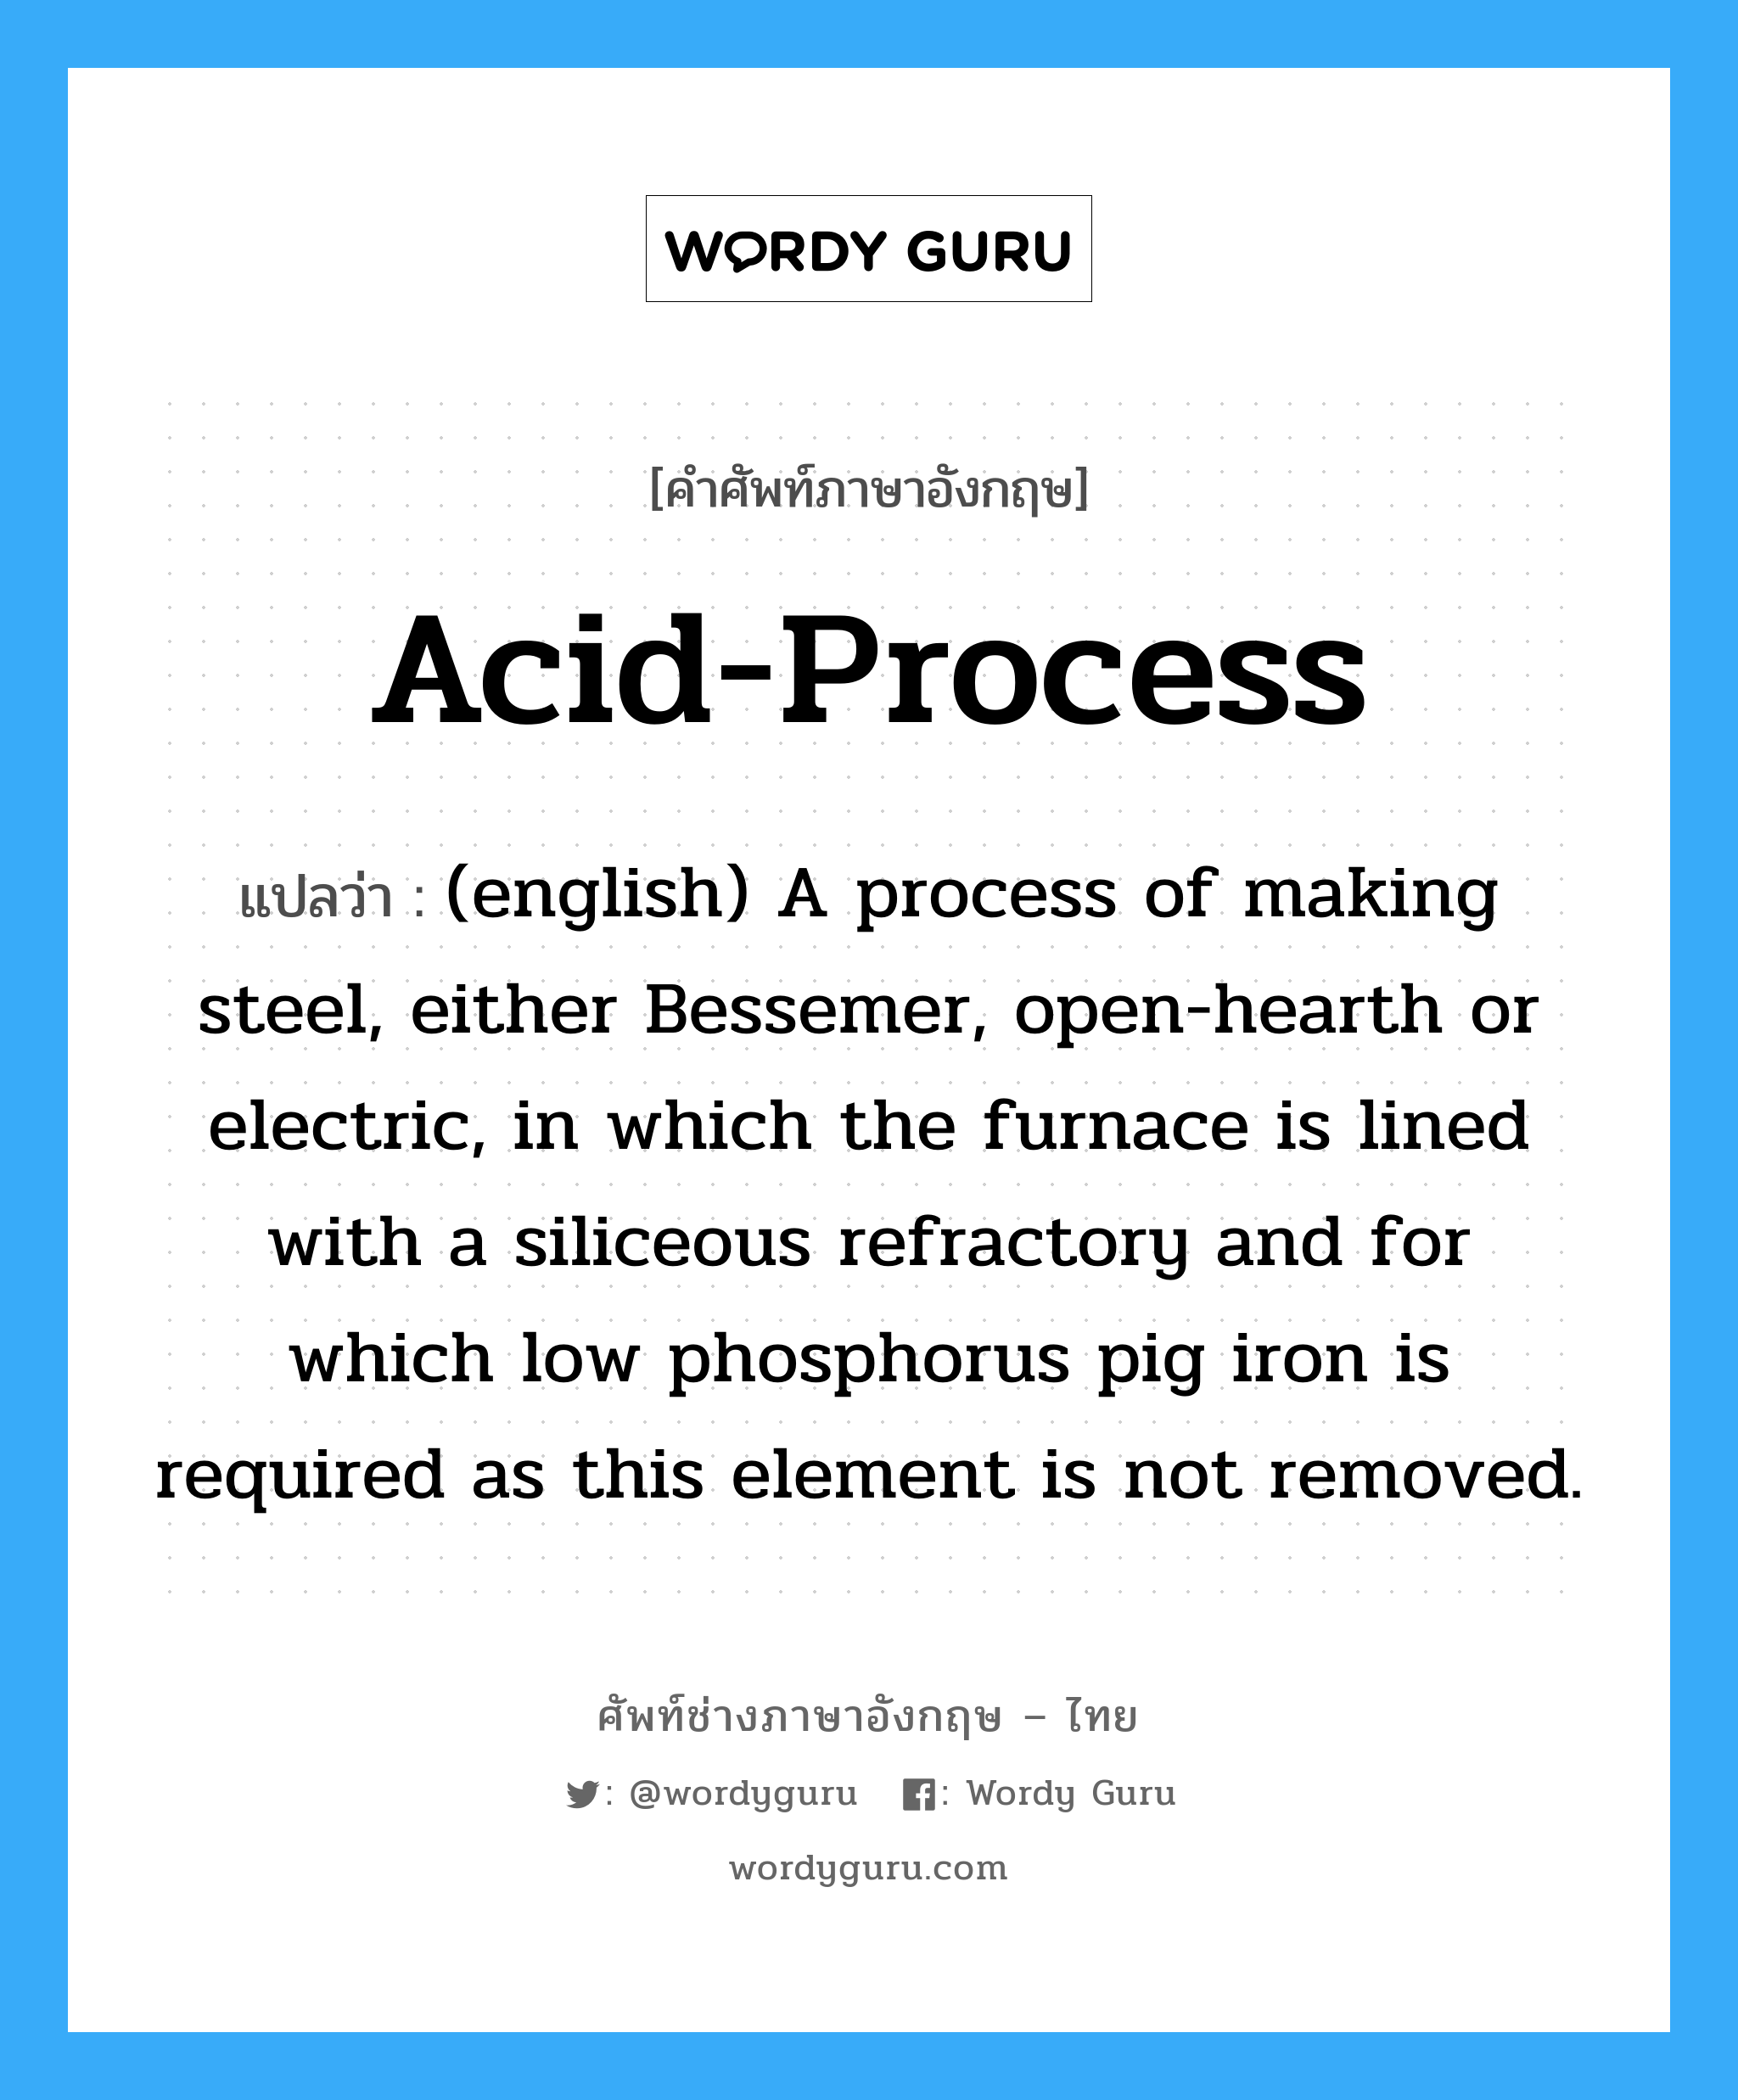 Acid-Process แปลว่า?, คำศัพท์ช่างภาษาอังกฤษ - ไทย Acid-Process คำศัพท์ภาษาอังกฤษ Acid-Process แปลว่า (english) A process of making steel, either Bessemer, open-hearth or electric, in which the furnace is lined with a siliceous refractory and for which low phosphorus pig iron is required as this element is not removed.